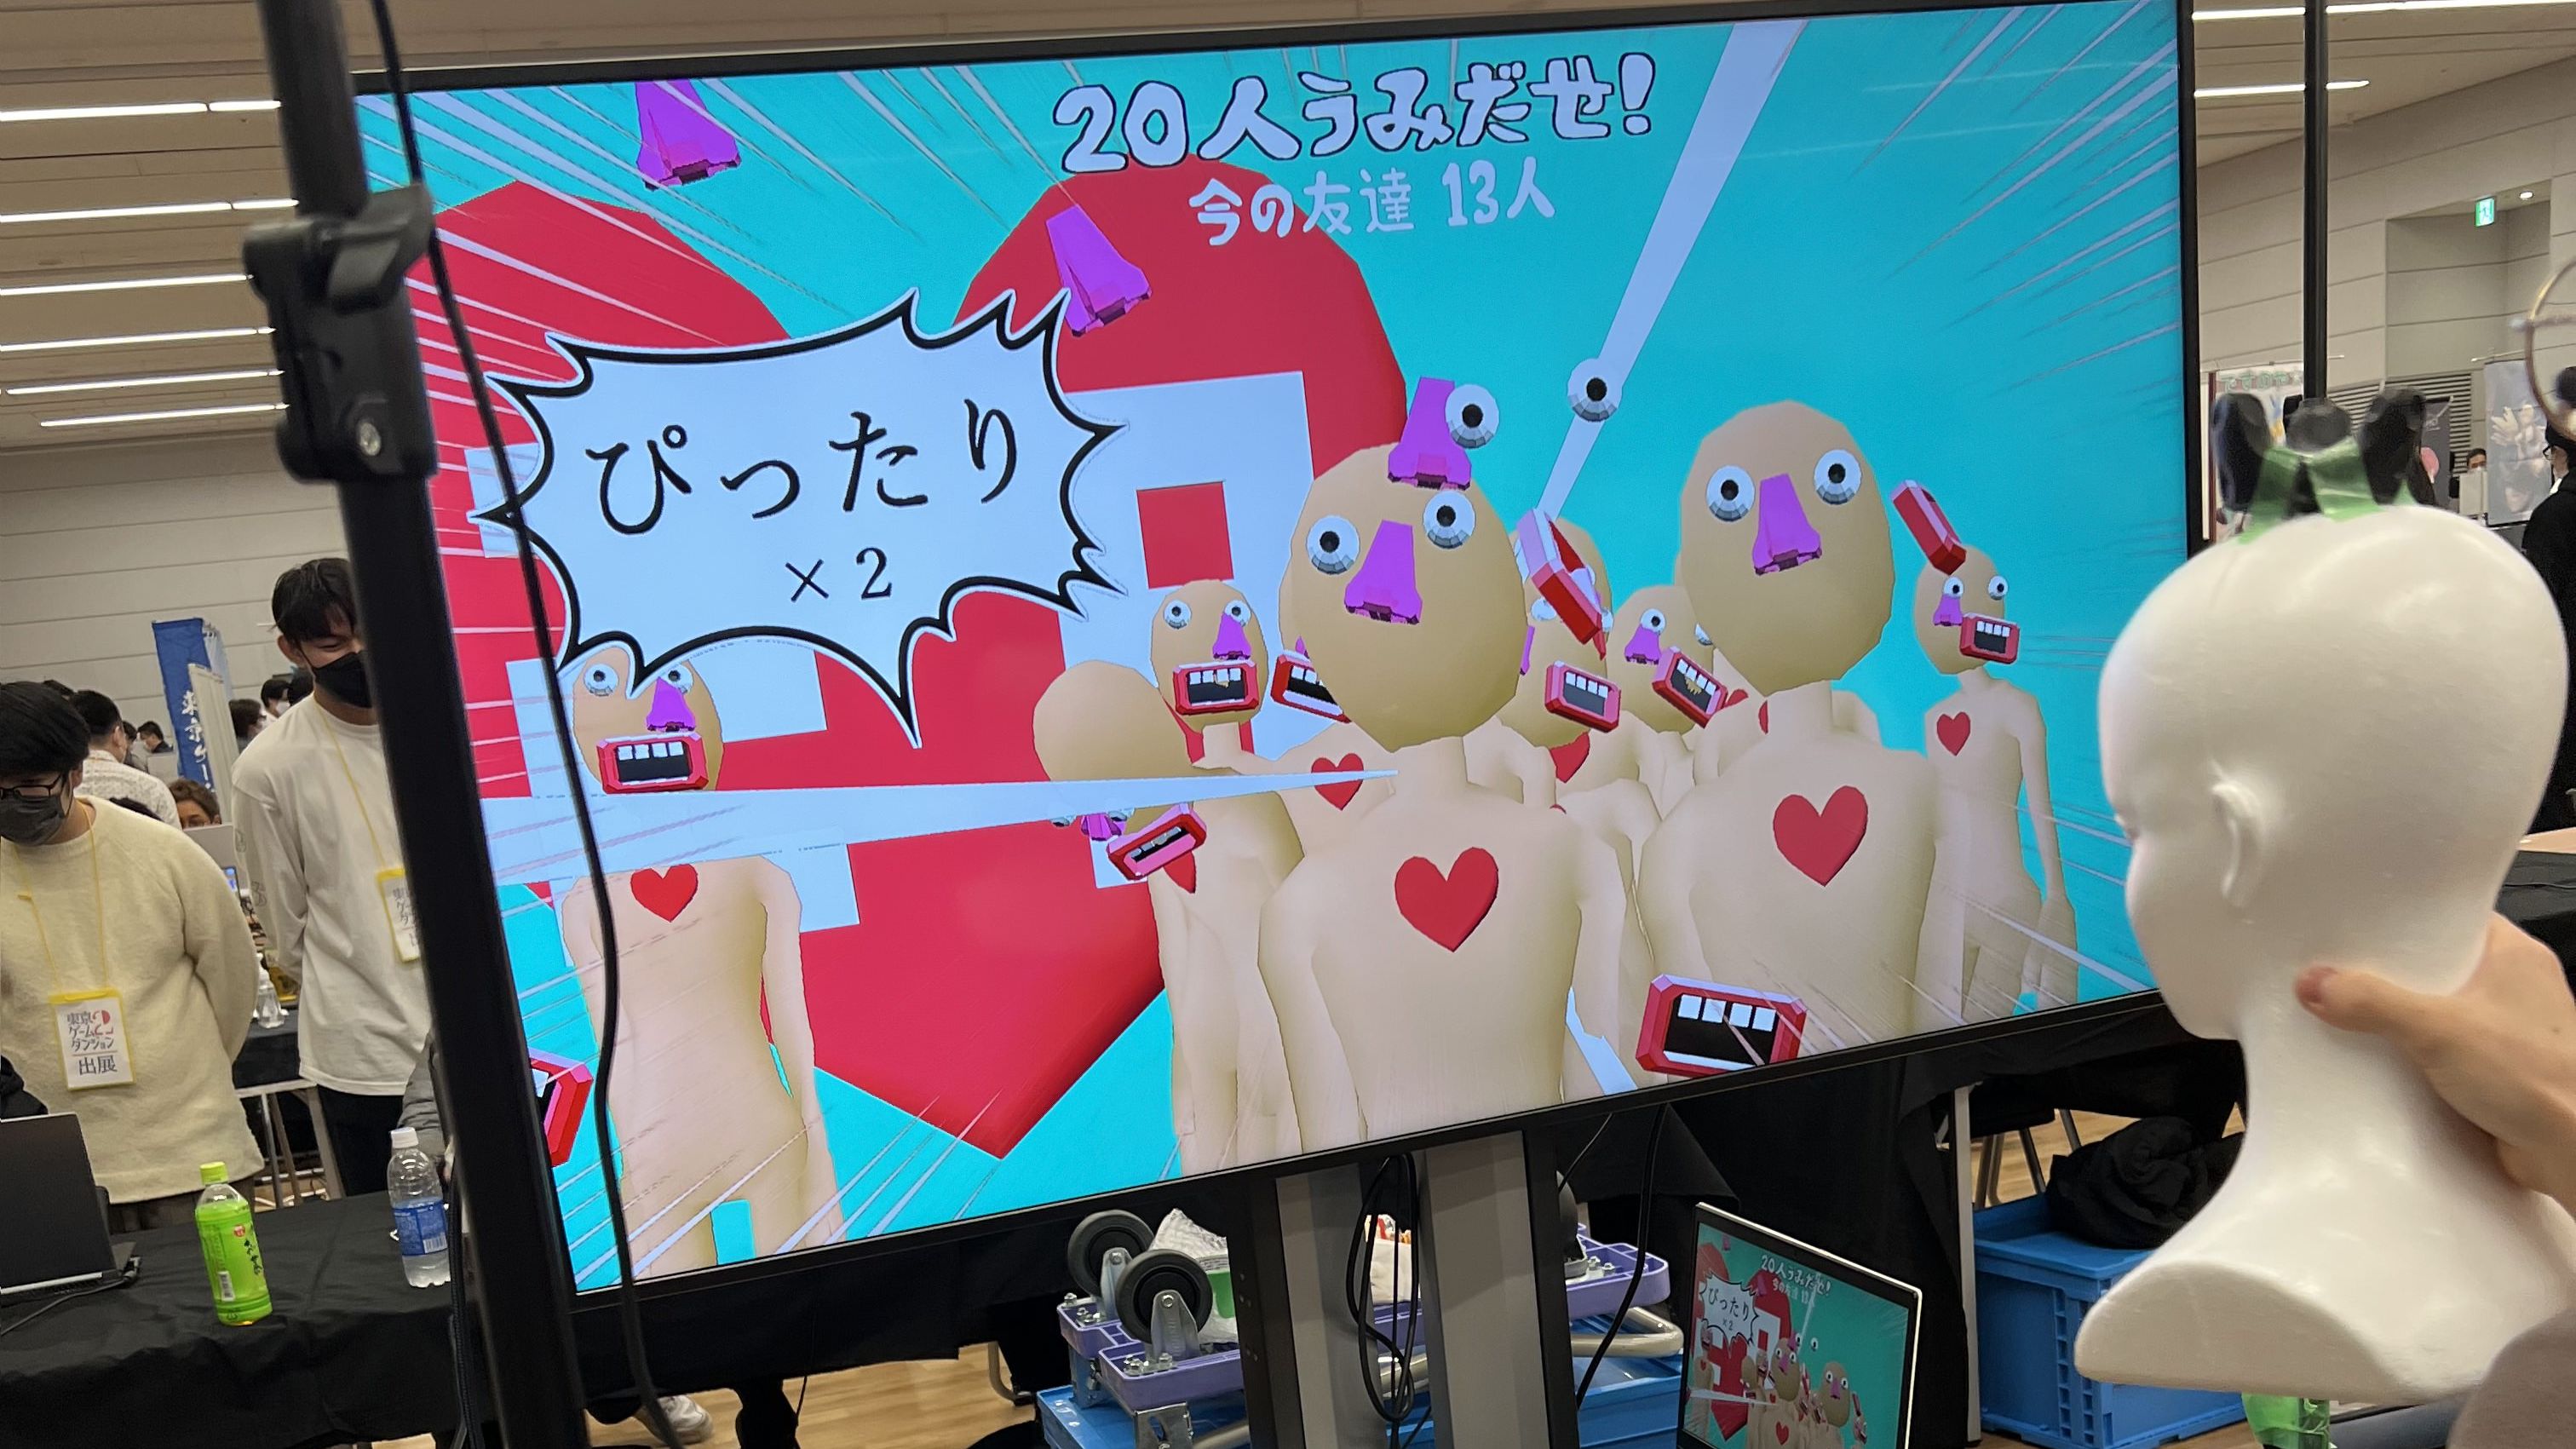 6 Things We Saw on the First Day of Tokyo Game Show 2022 | Tokyo Weekender